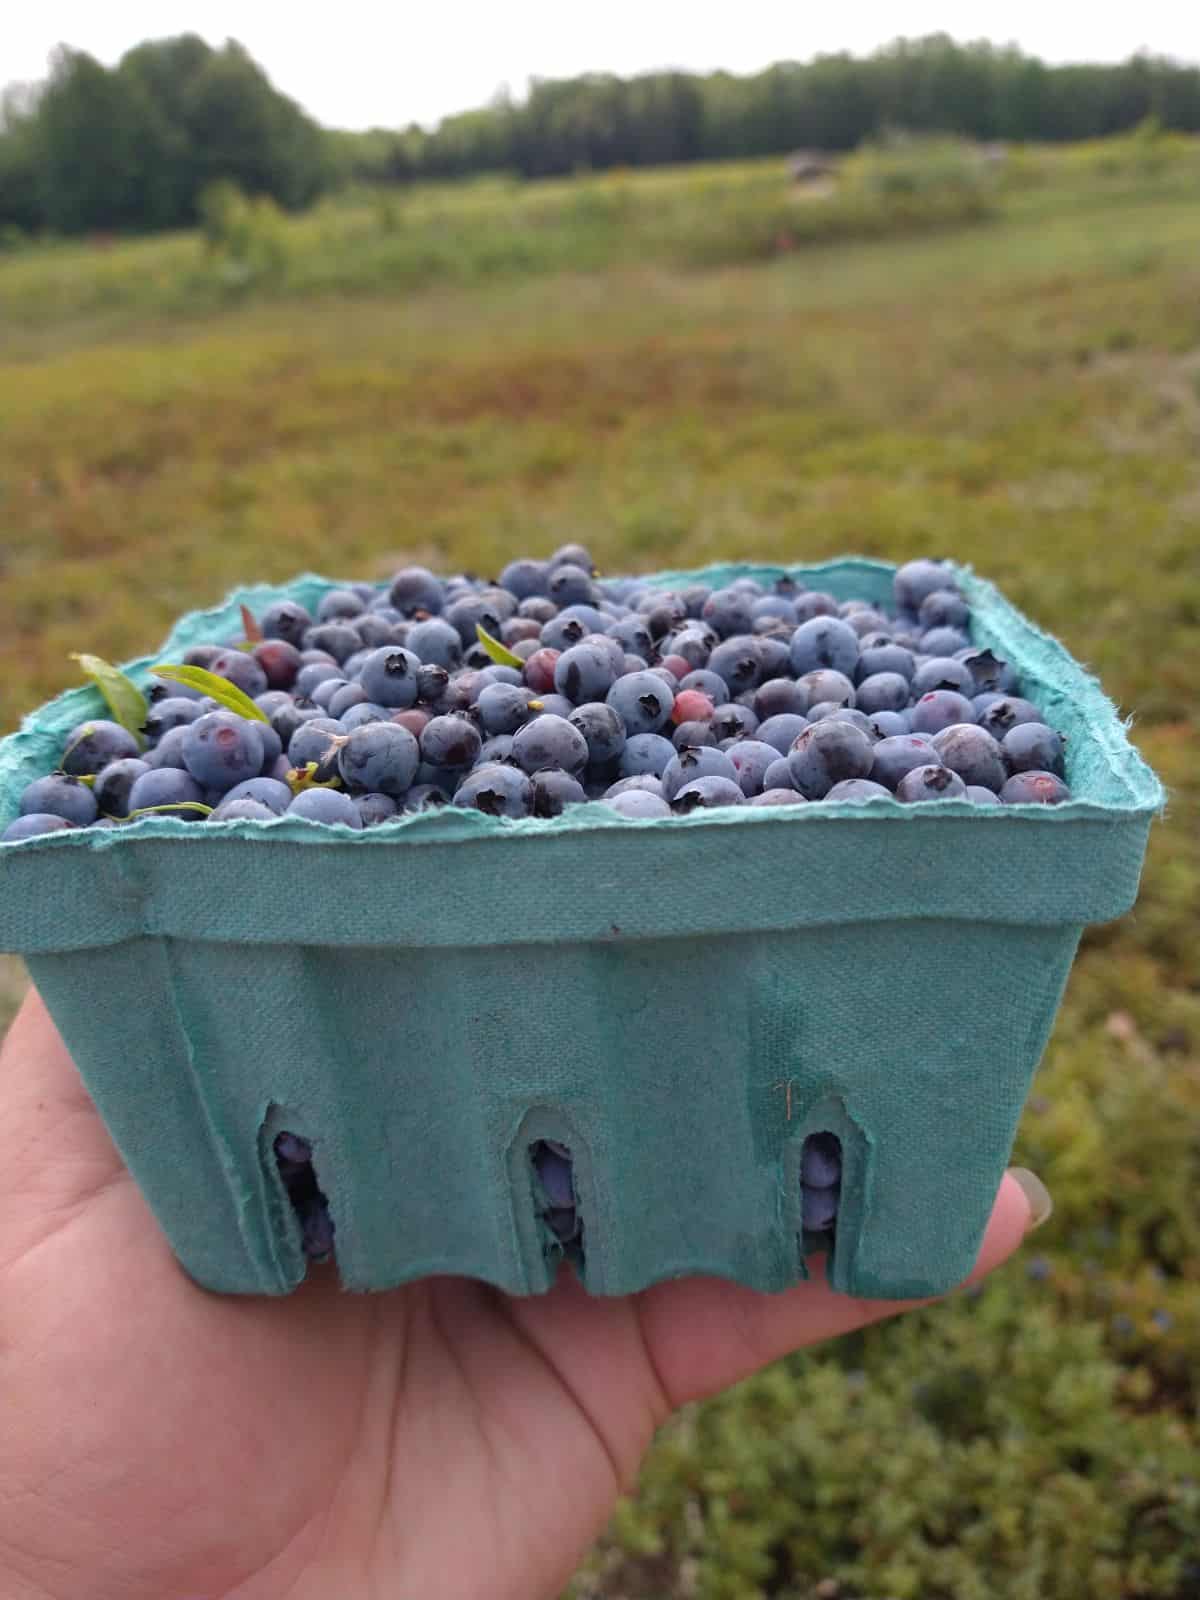 Freshly picked blueberries in a quart sized container in someone's hand with the field in the background.